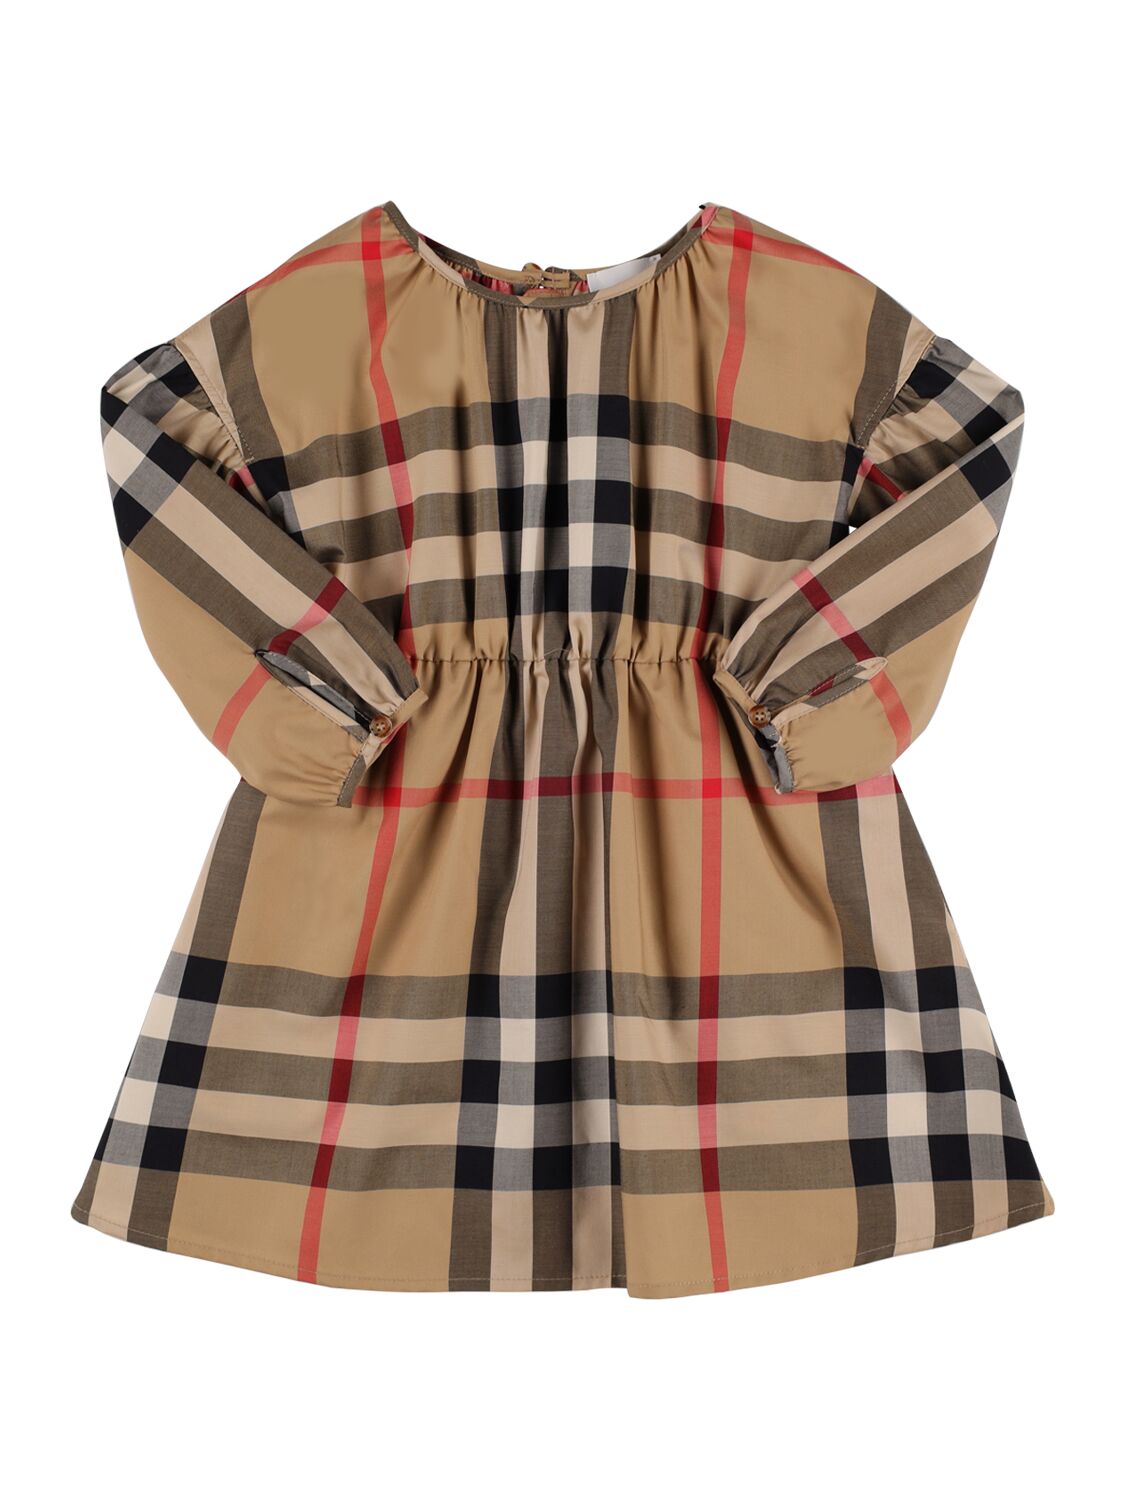 Burberry Kids' Check Print Cotton Dress In Brown